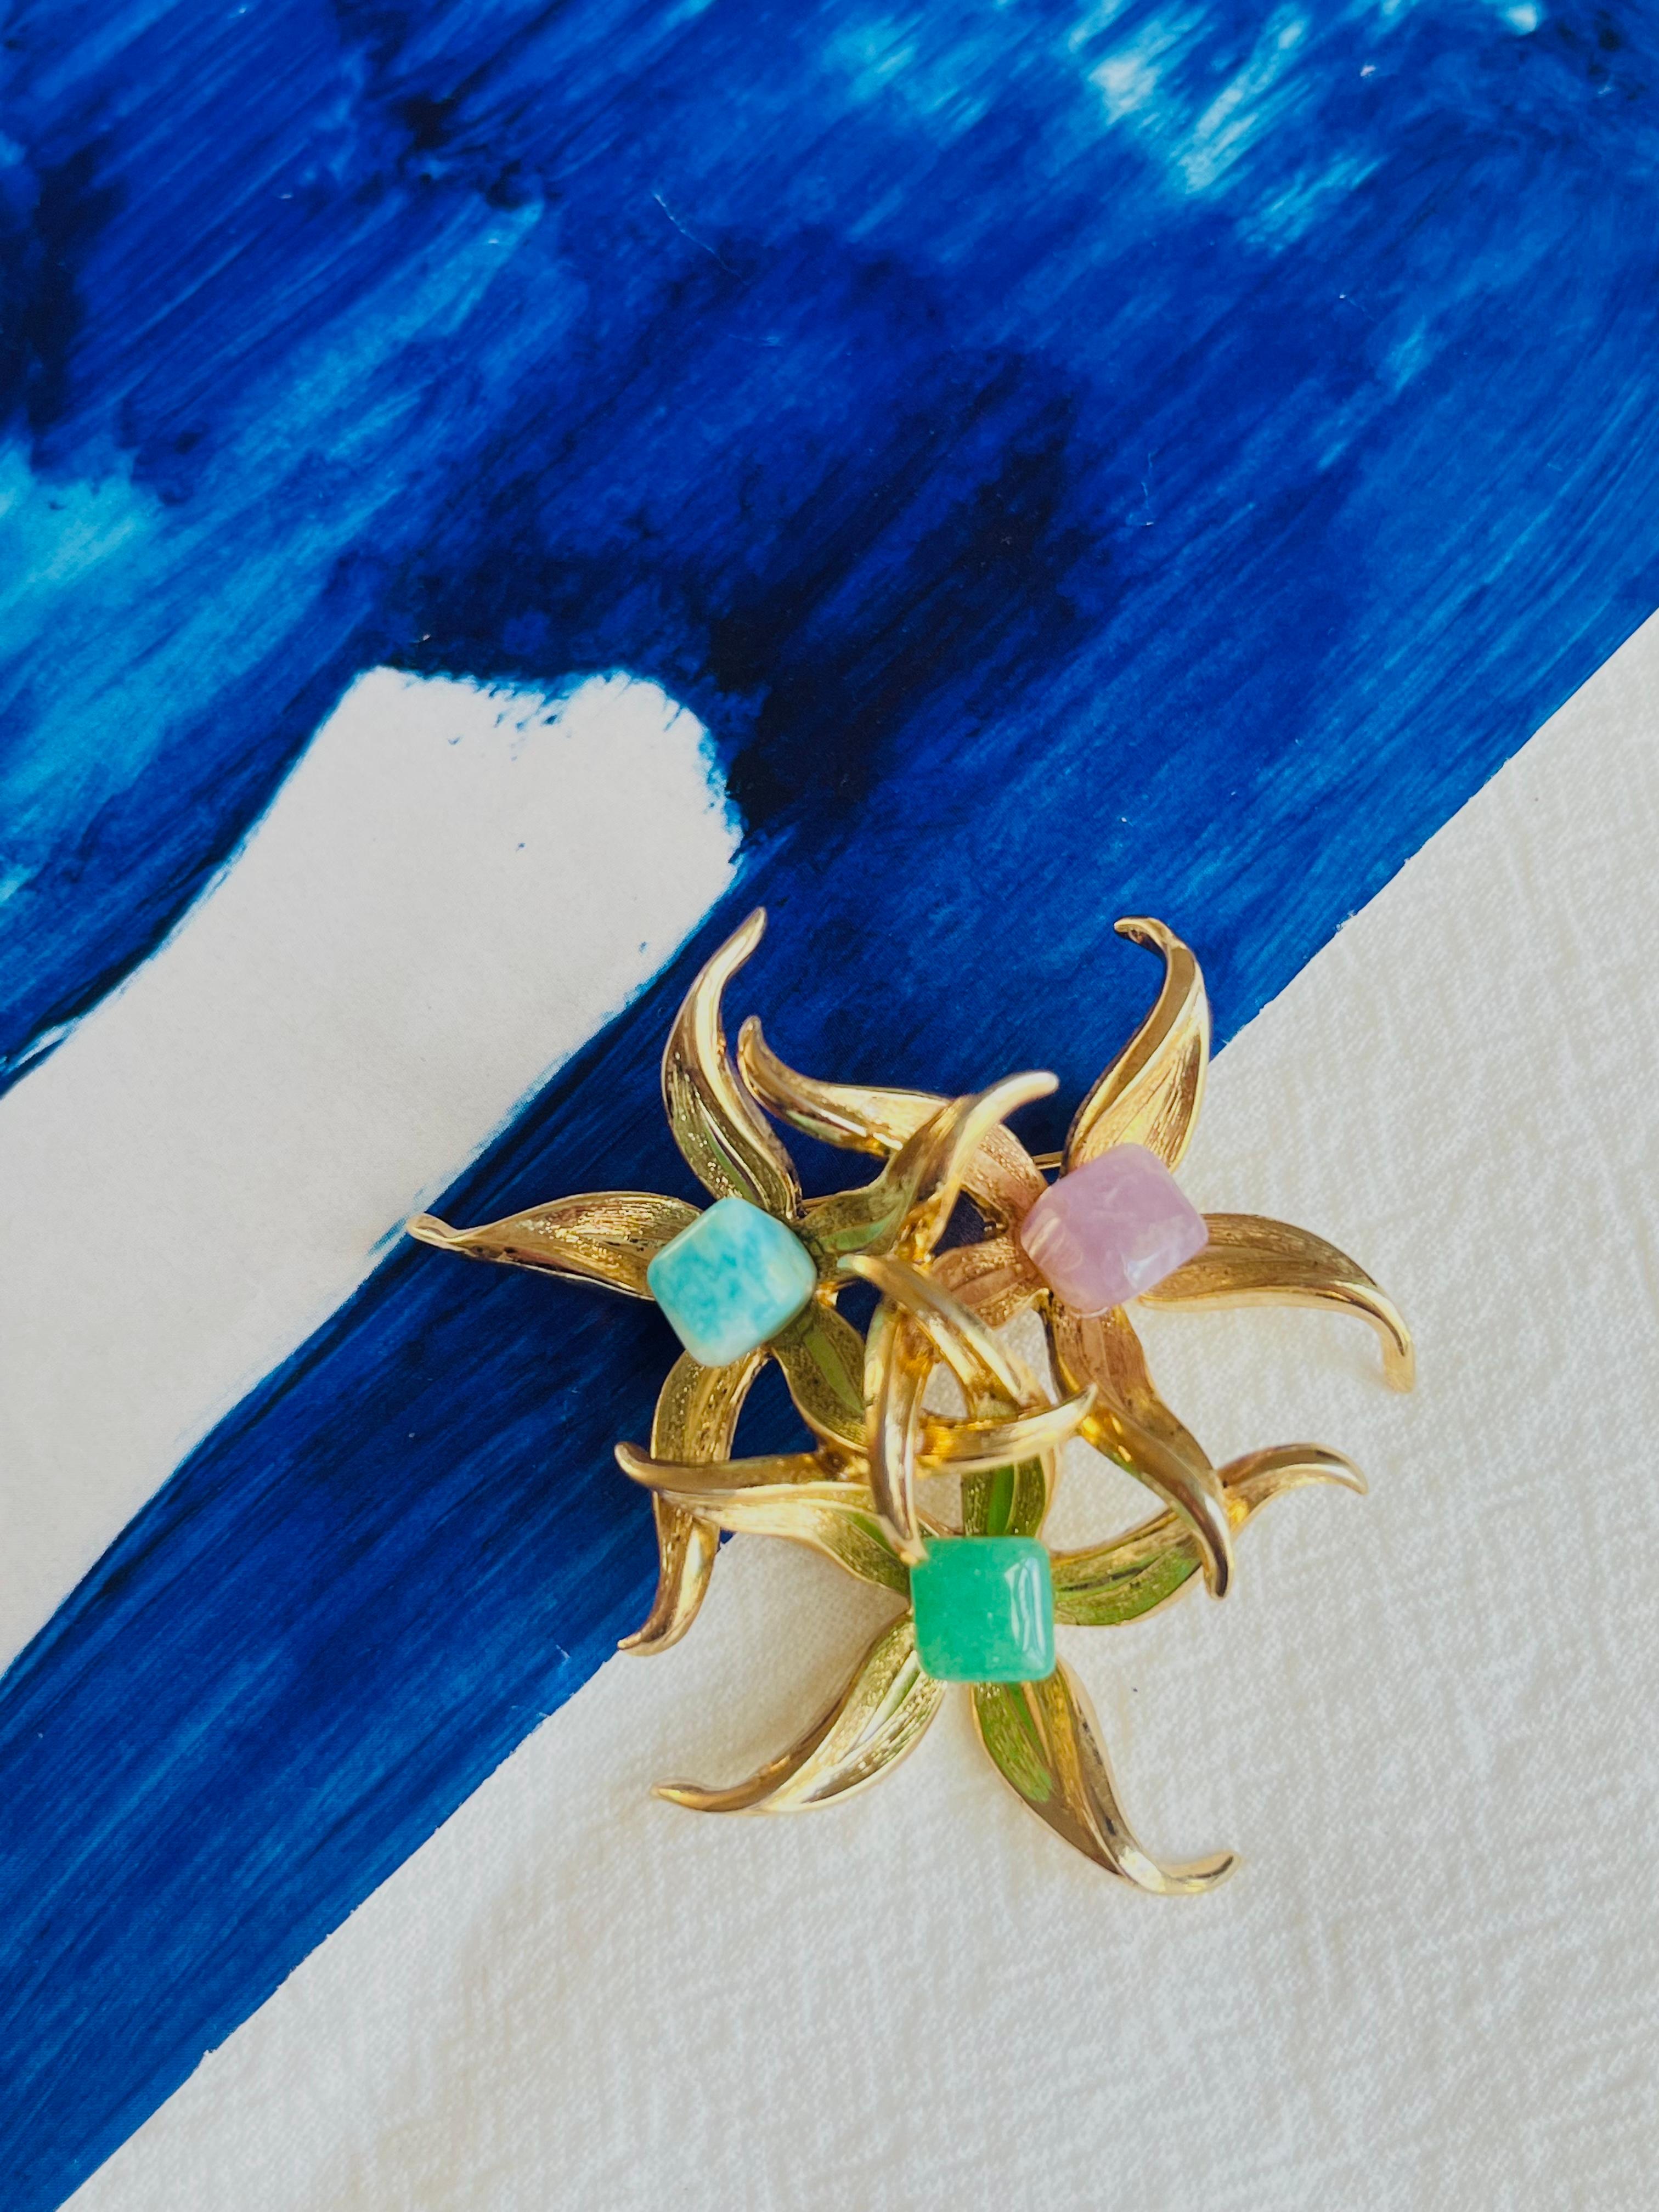 Christian Dior GROSSE 1966 Vintage Trio Flower Starfish Cube Emerald Amethyst Aqua Brooch, Gold Tone

Very good condition. Signed at the rear. Rare to find.

Size: 5.5 cm x 5.0 cm.

Weight: 19.0 g.

_ _ _

Great for everyday wear. Come with velvet